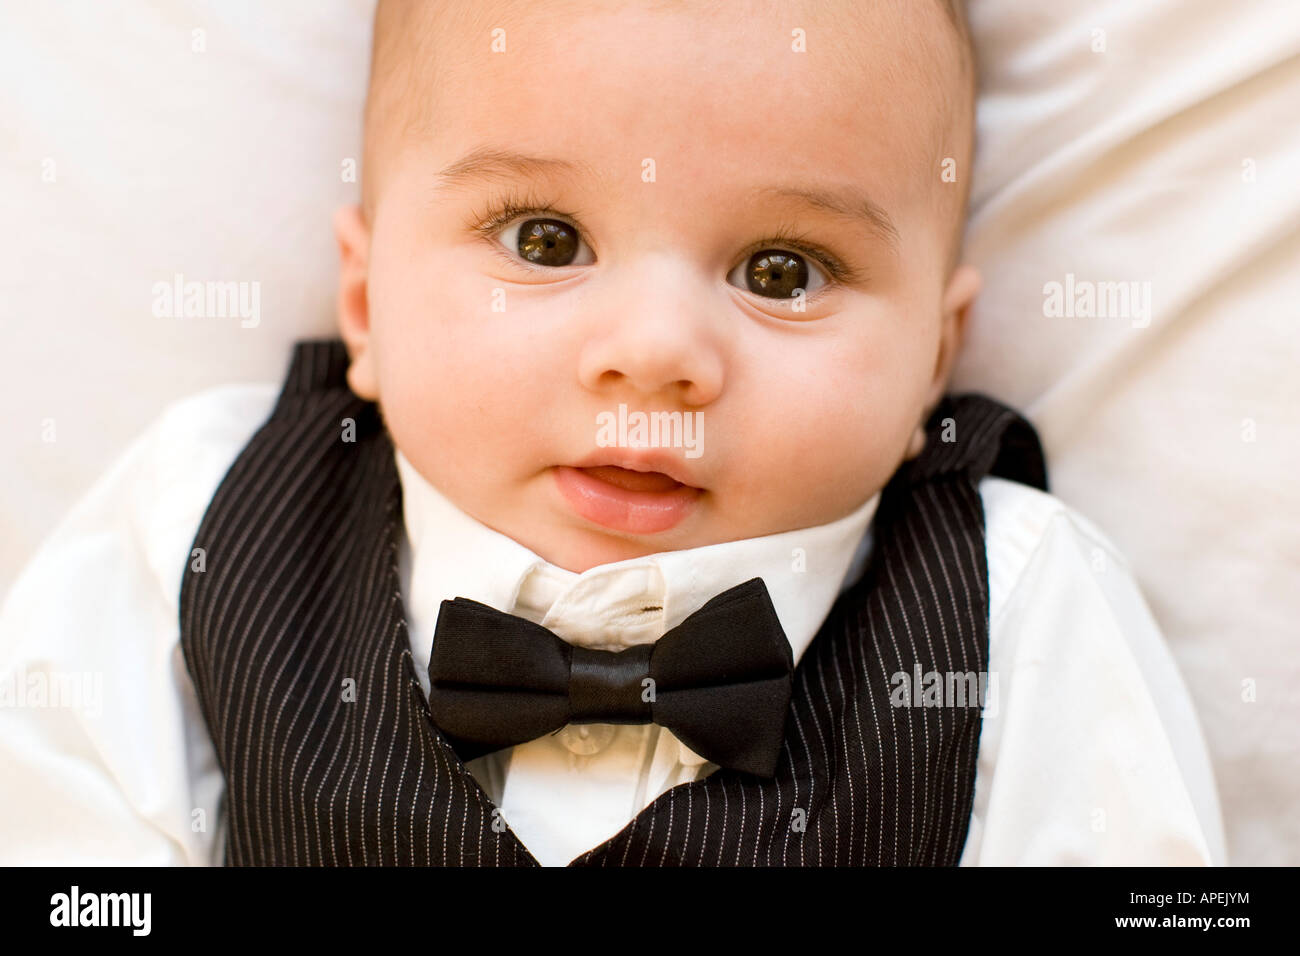 Baby wearing suit Stock Photo